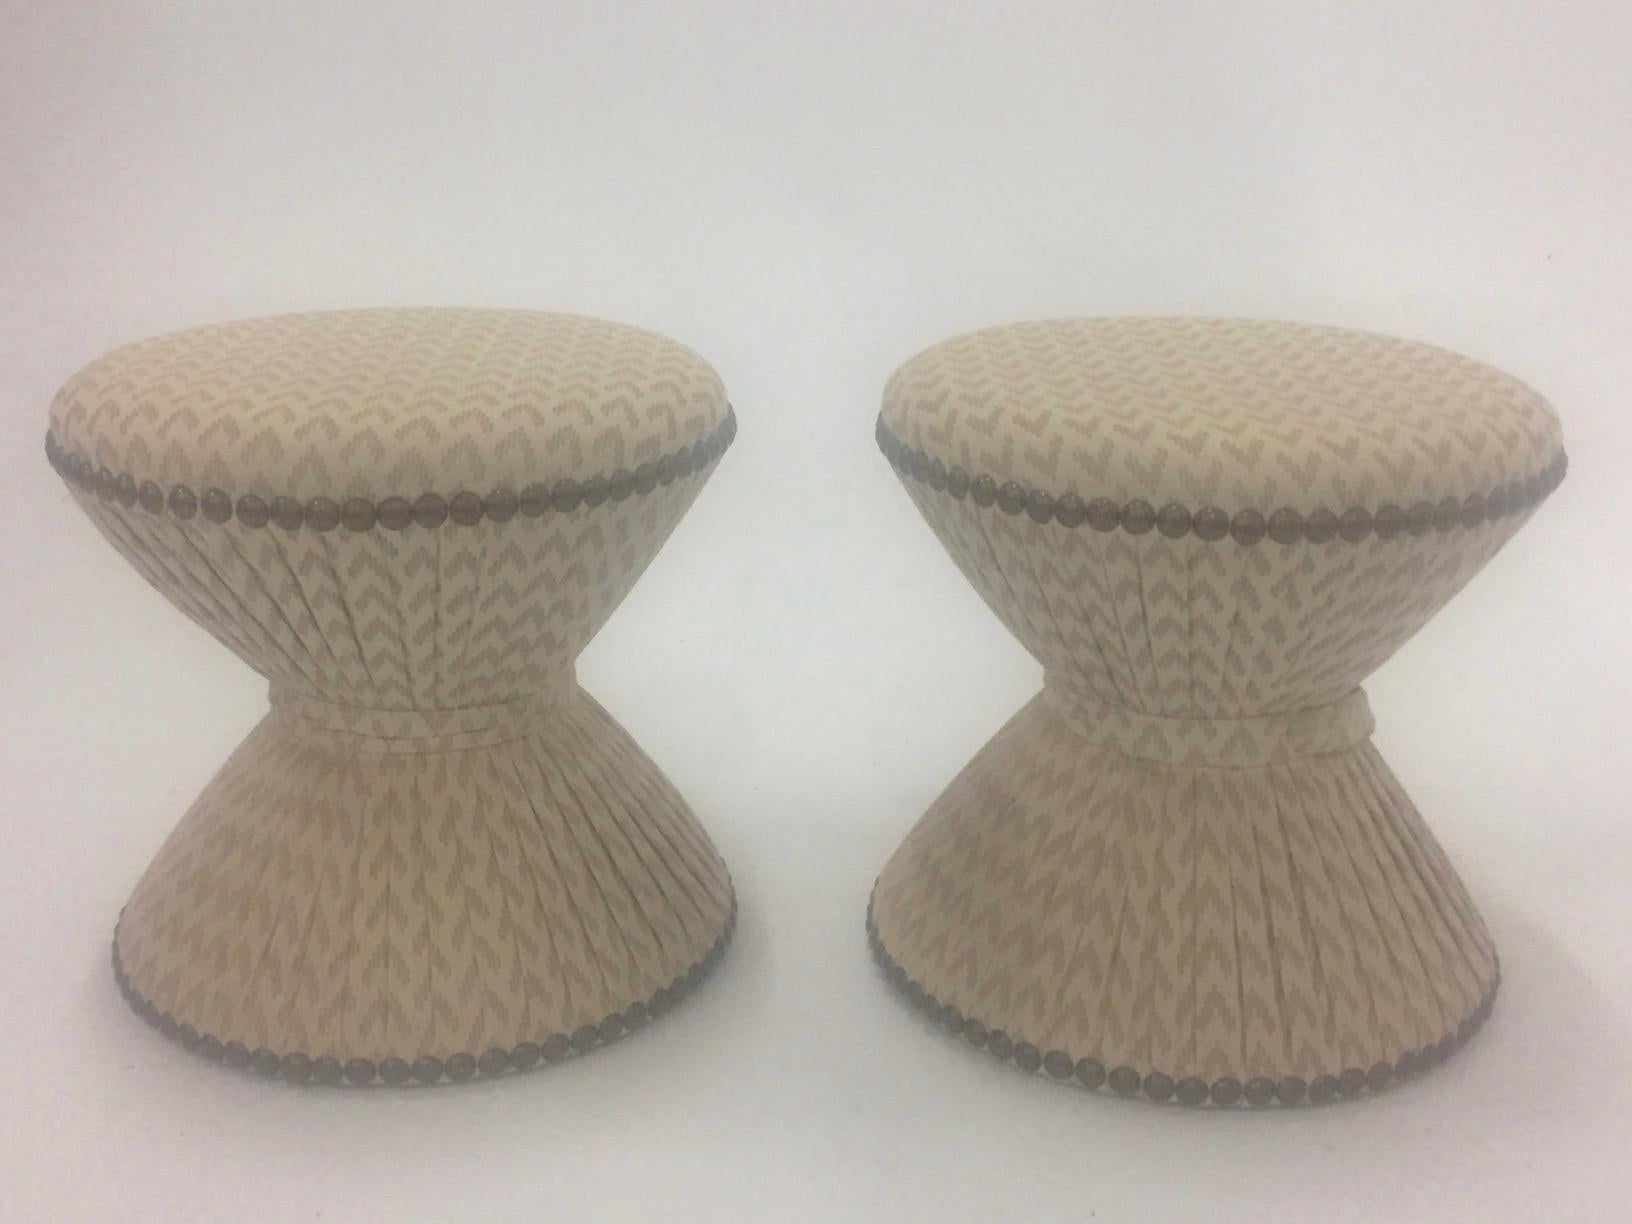 A pretty pair of fully upholstered hourglass shaped ottomans in a neutral cream fabric finished with nailheads.